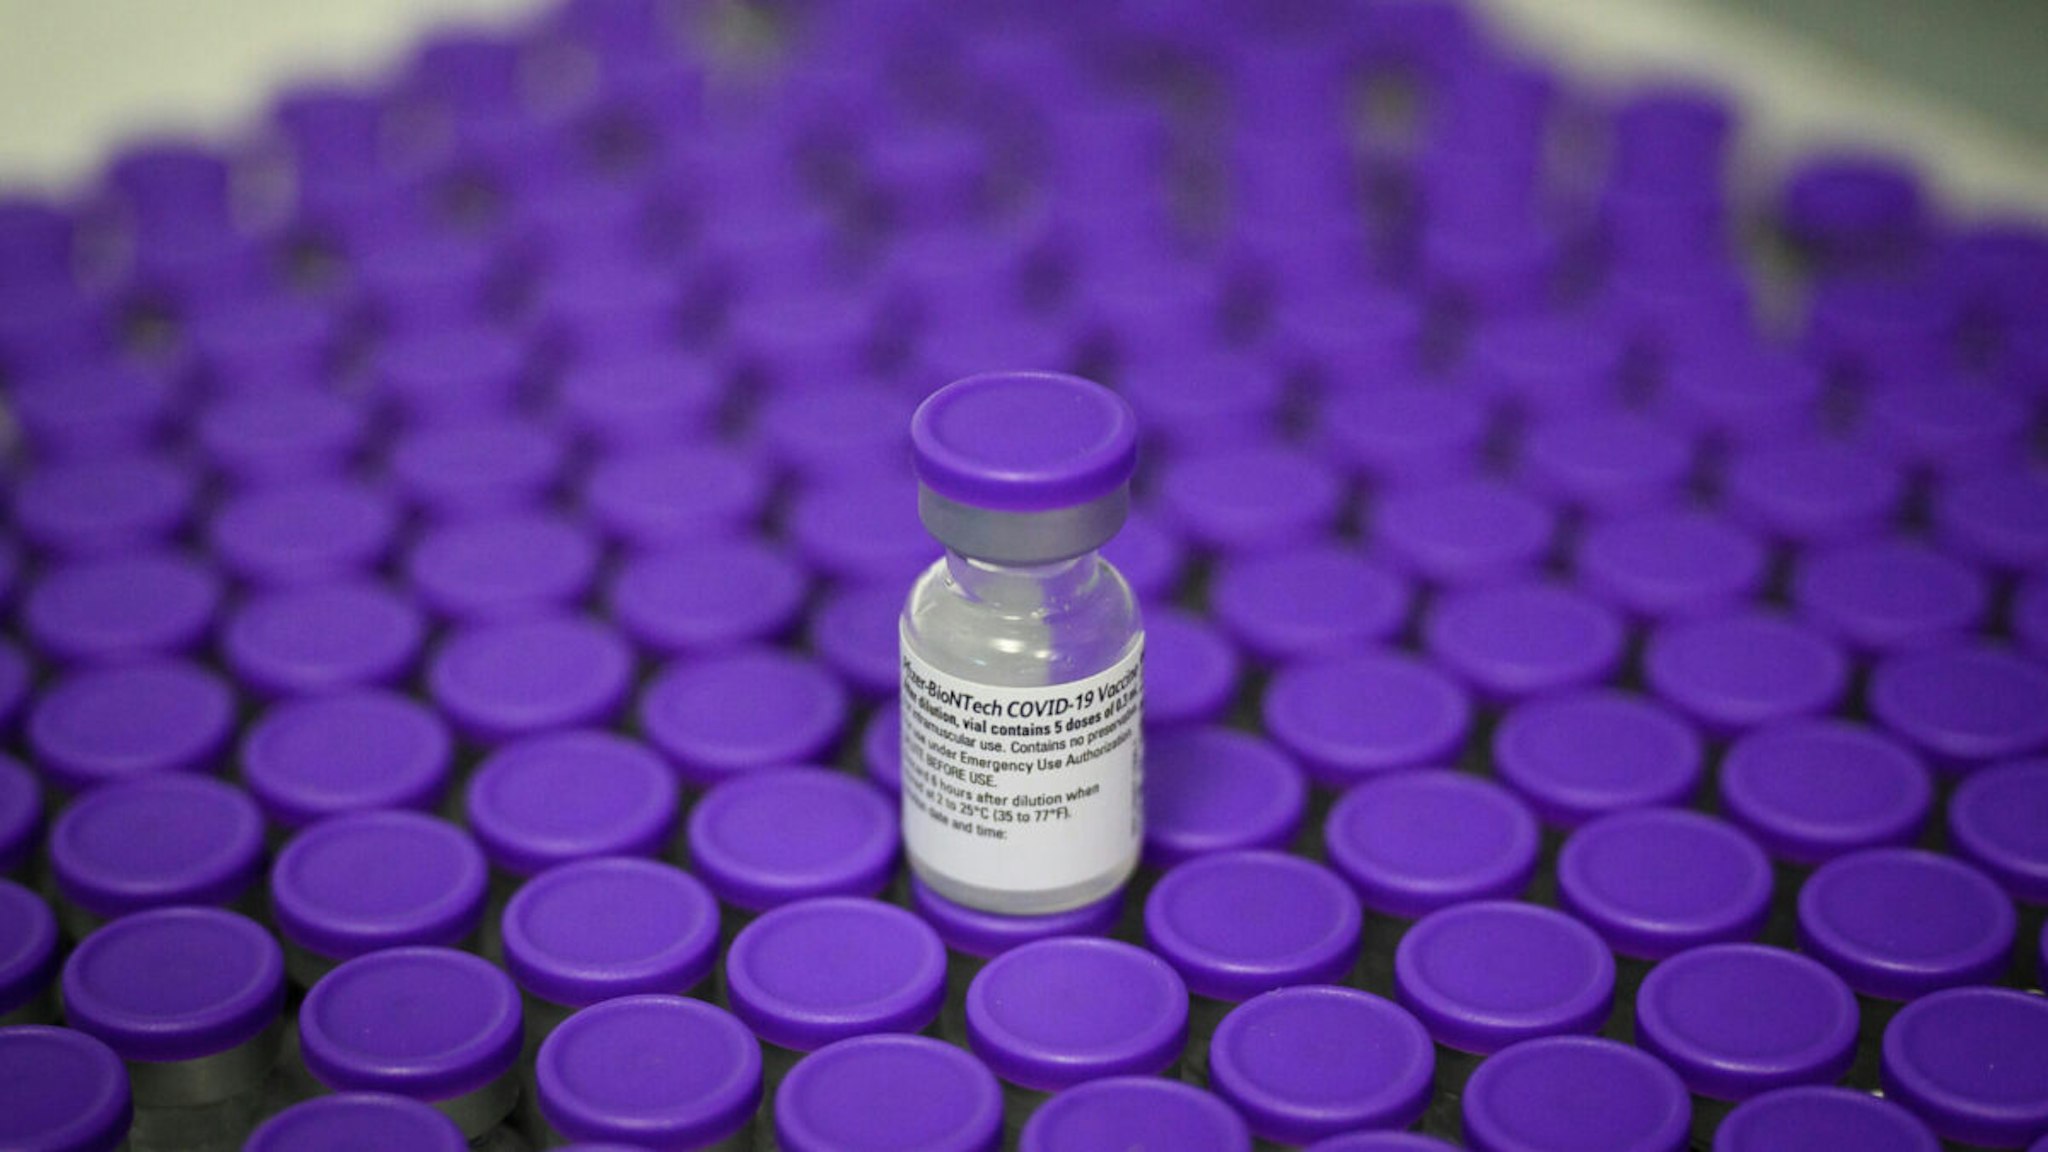 Vials of the Pfizer/BioNTech Covid-19 vaccine are seen during a vaccination clinic at the Sir Ludwig Guttmann Health and Wellbeing Centre on December 15, 2020 in Stratford, England.